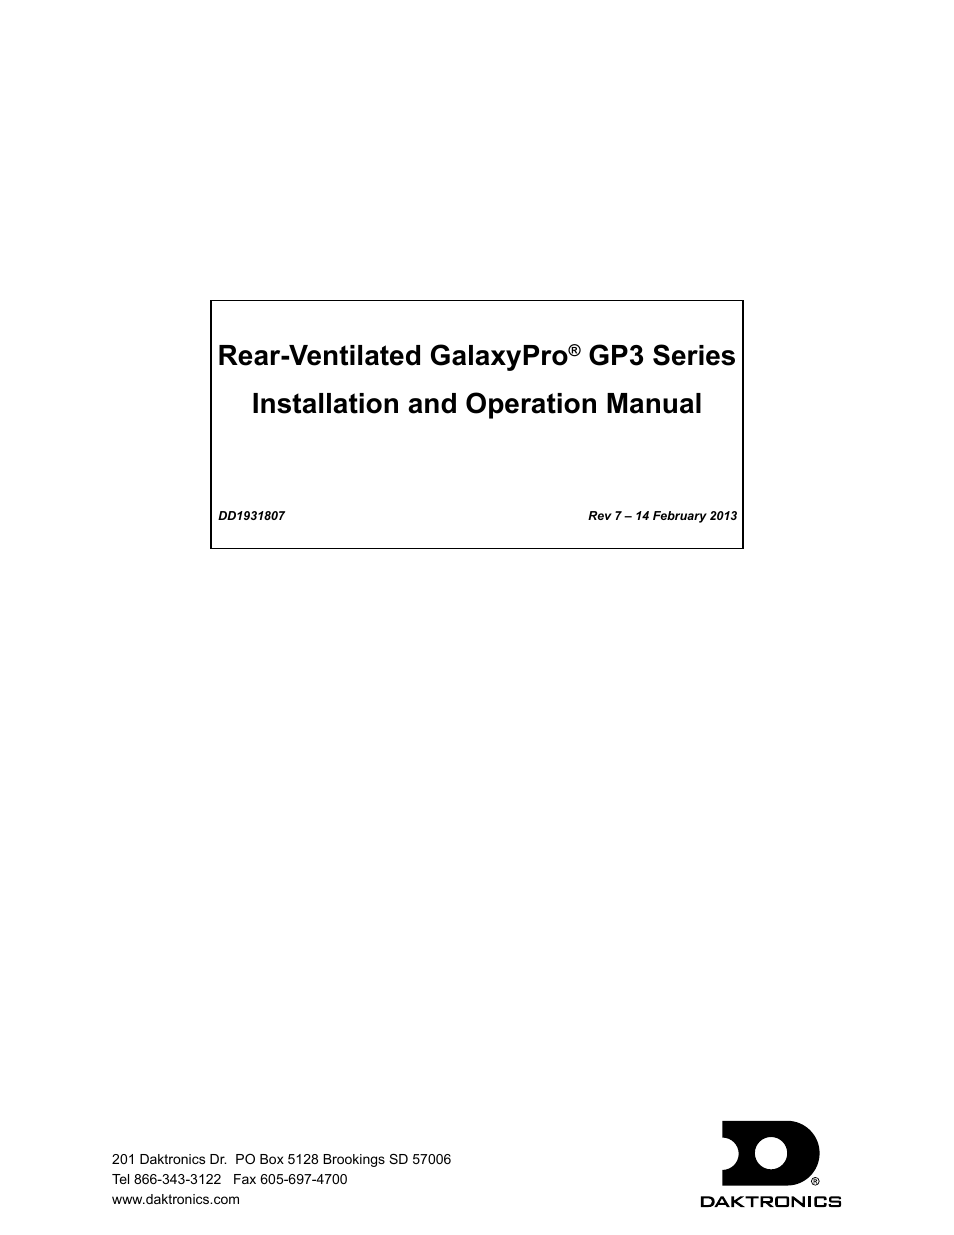 Front-Ventilated GalaxyPro GP3 Series